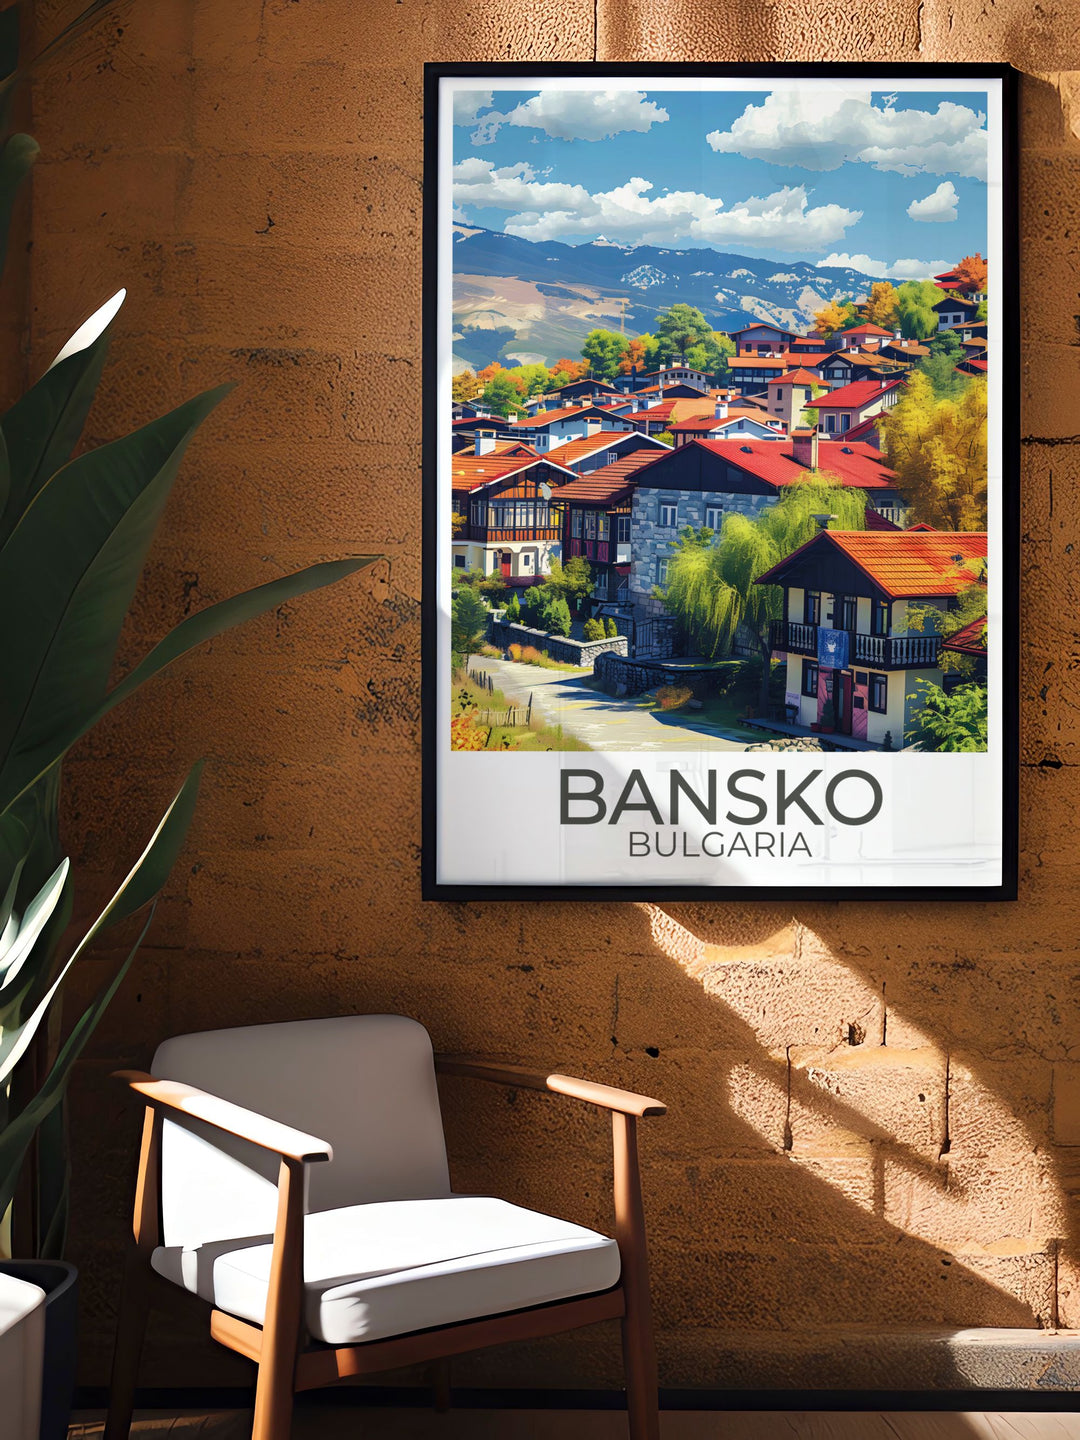 Bansko Ski Resorts modern lifts and stunning mountain views are beautifully depicted in this art print, making it a versatile piece for any home decor.